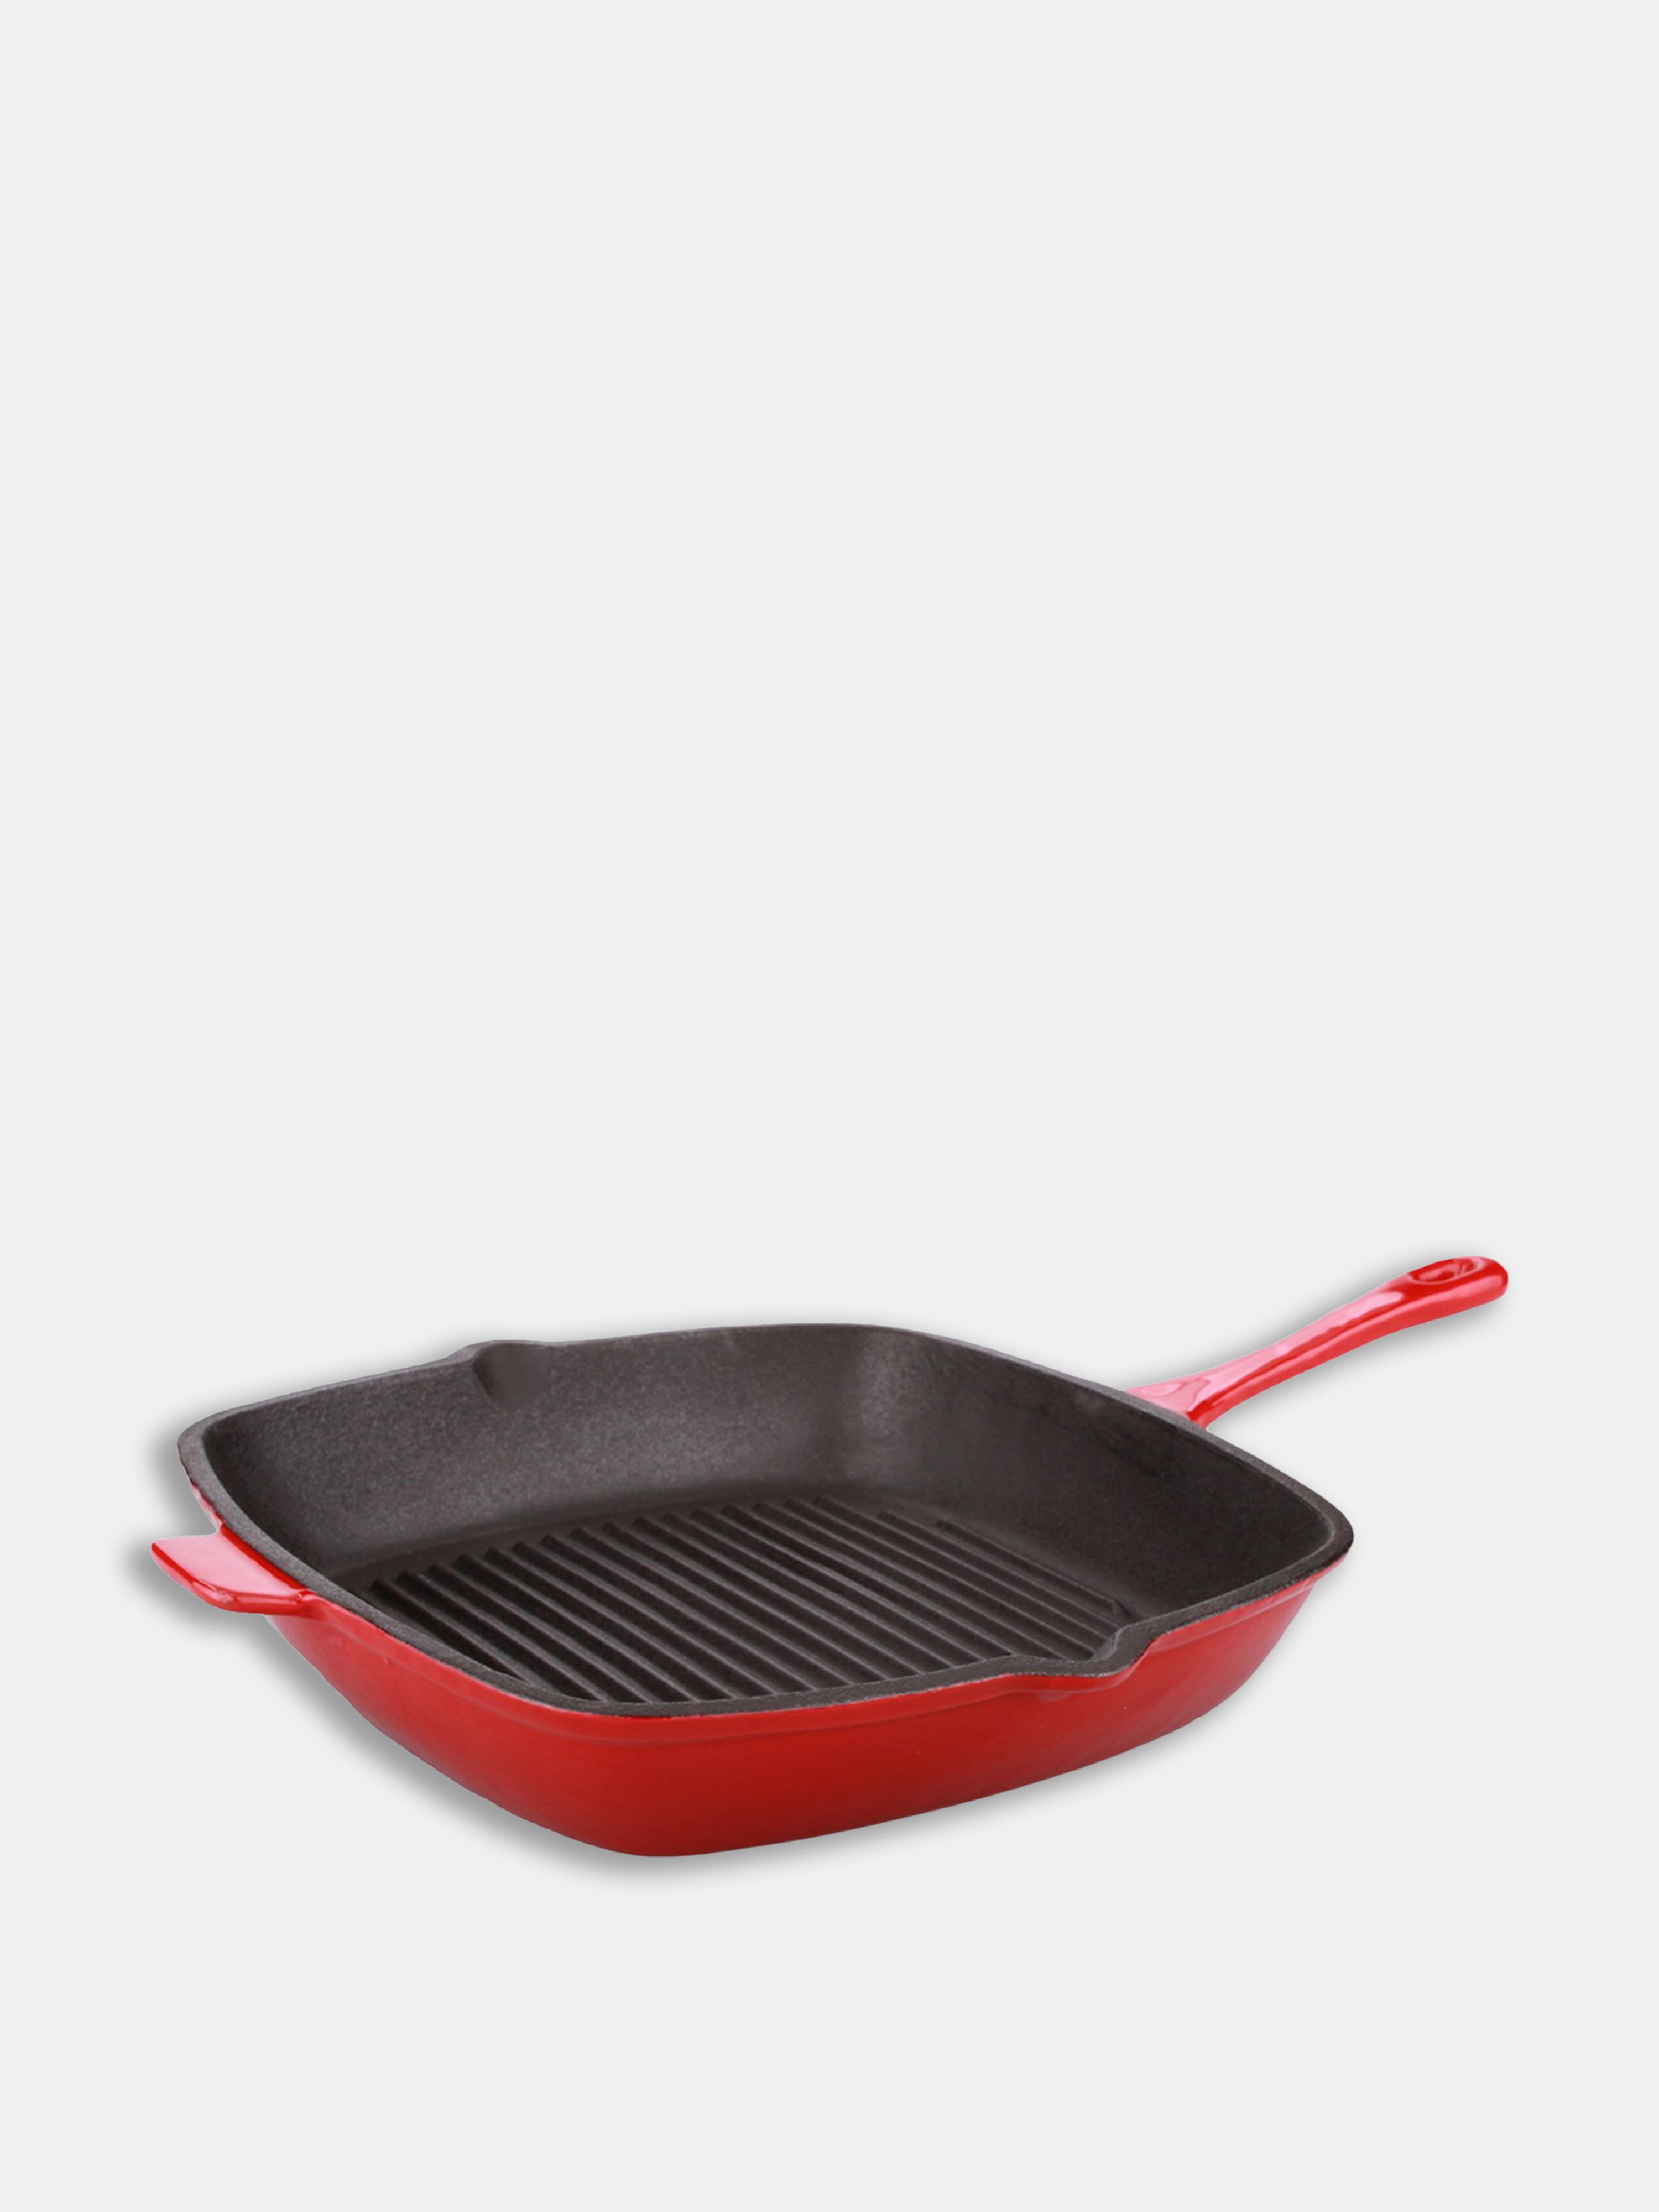 Berghoff Neo 11" Cast Iron Square Grill Pan, Red